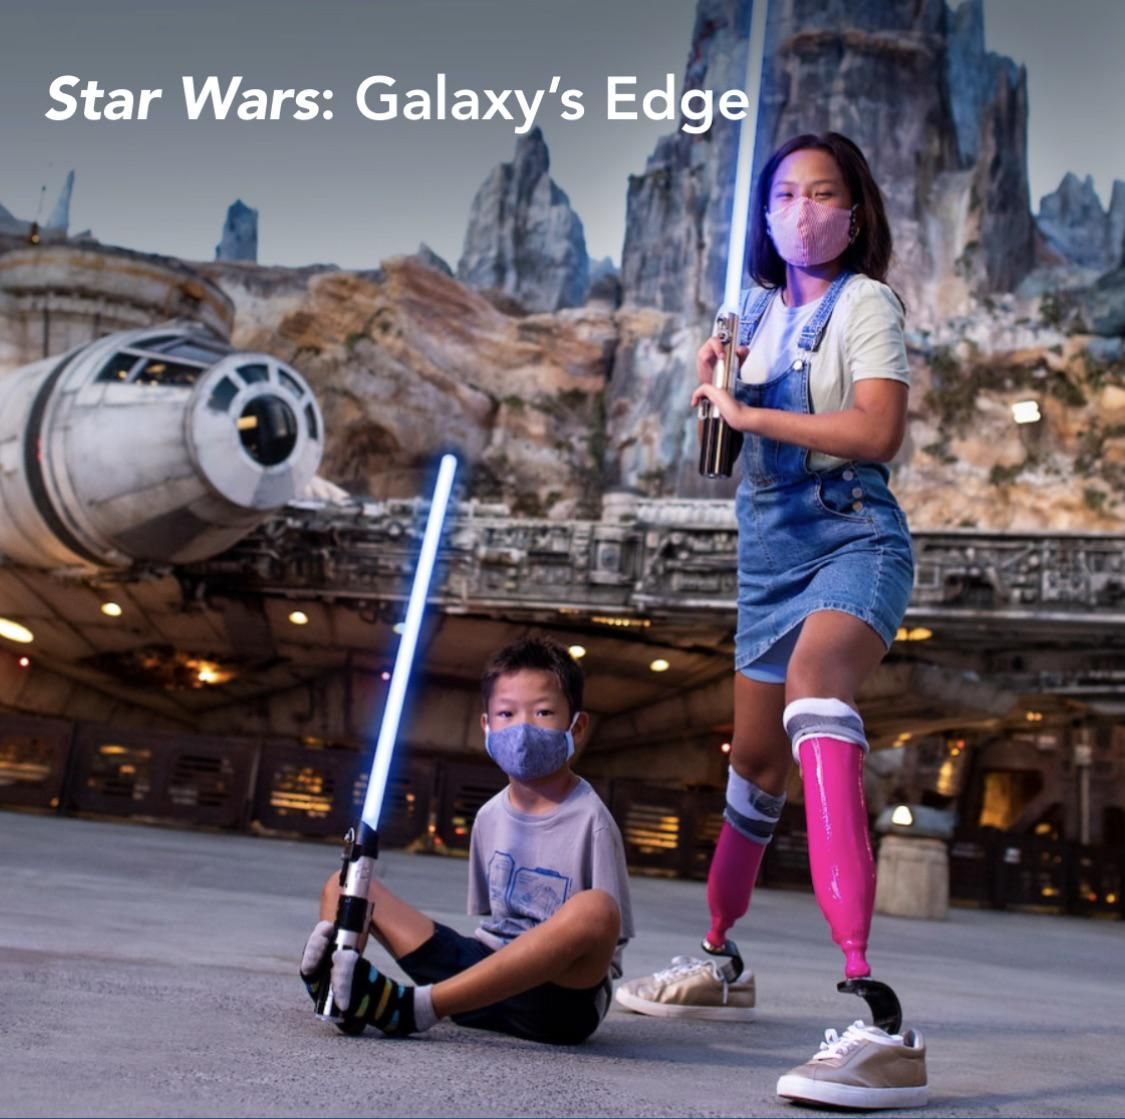 Ad currently on Disney World site. Promoting diversity or lightsaber safety?